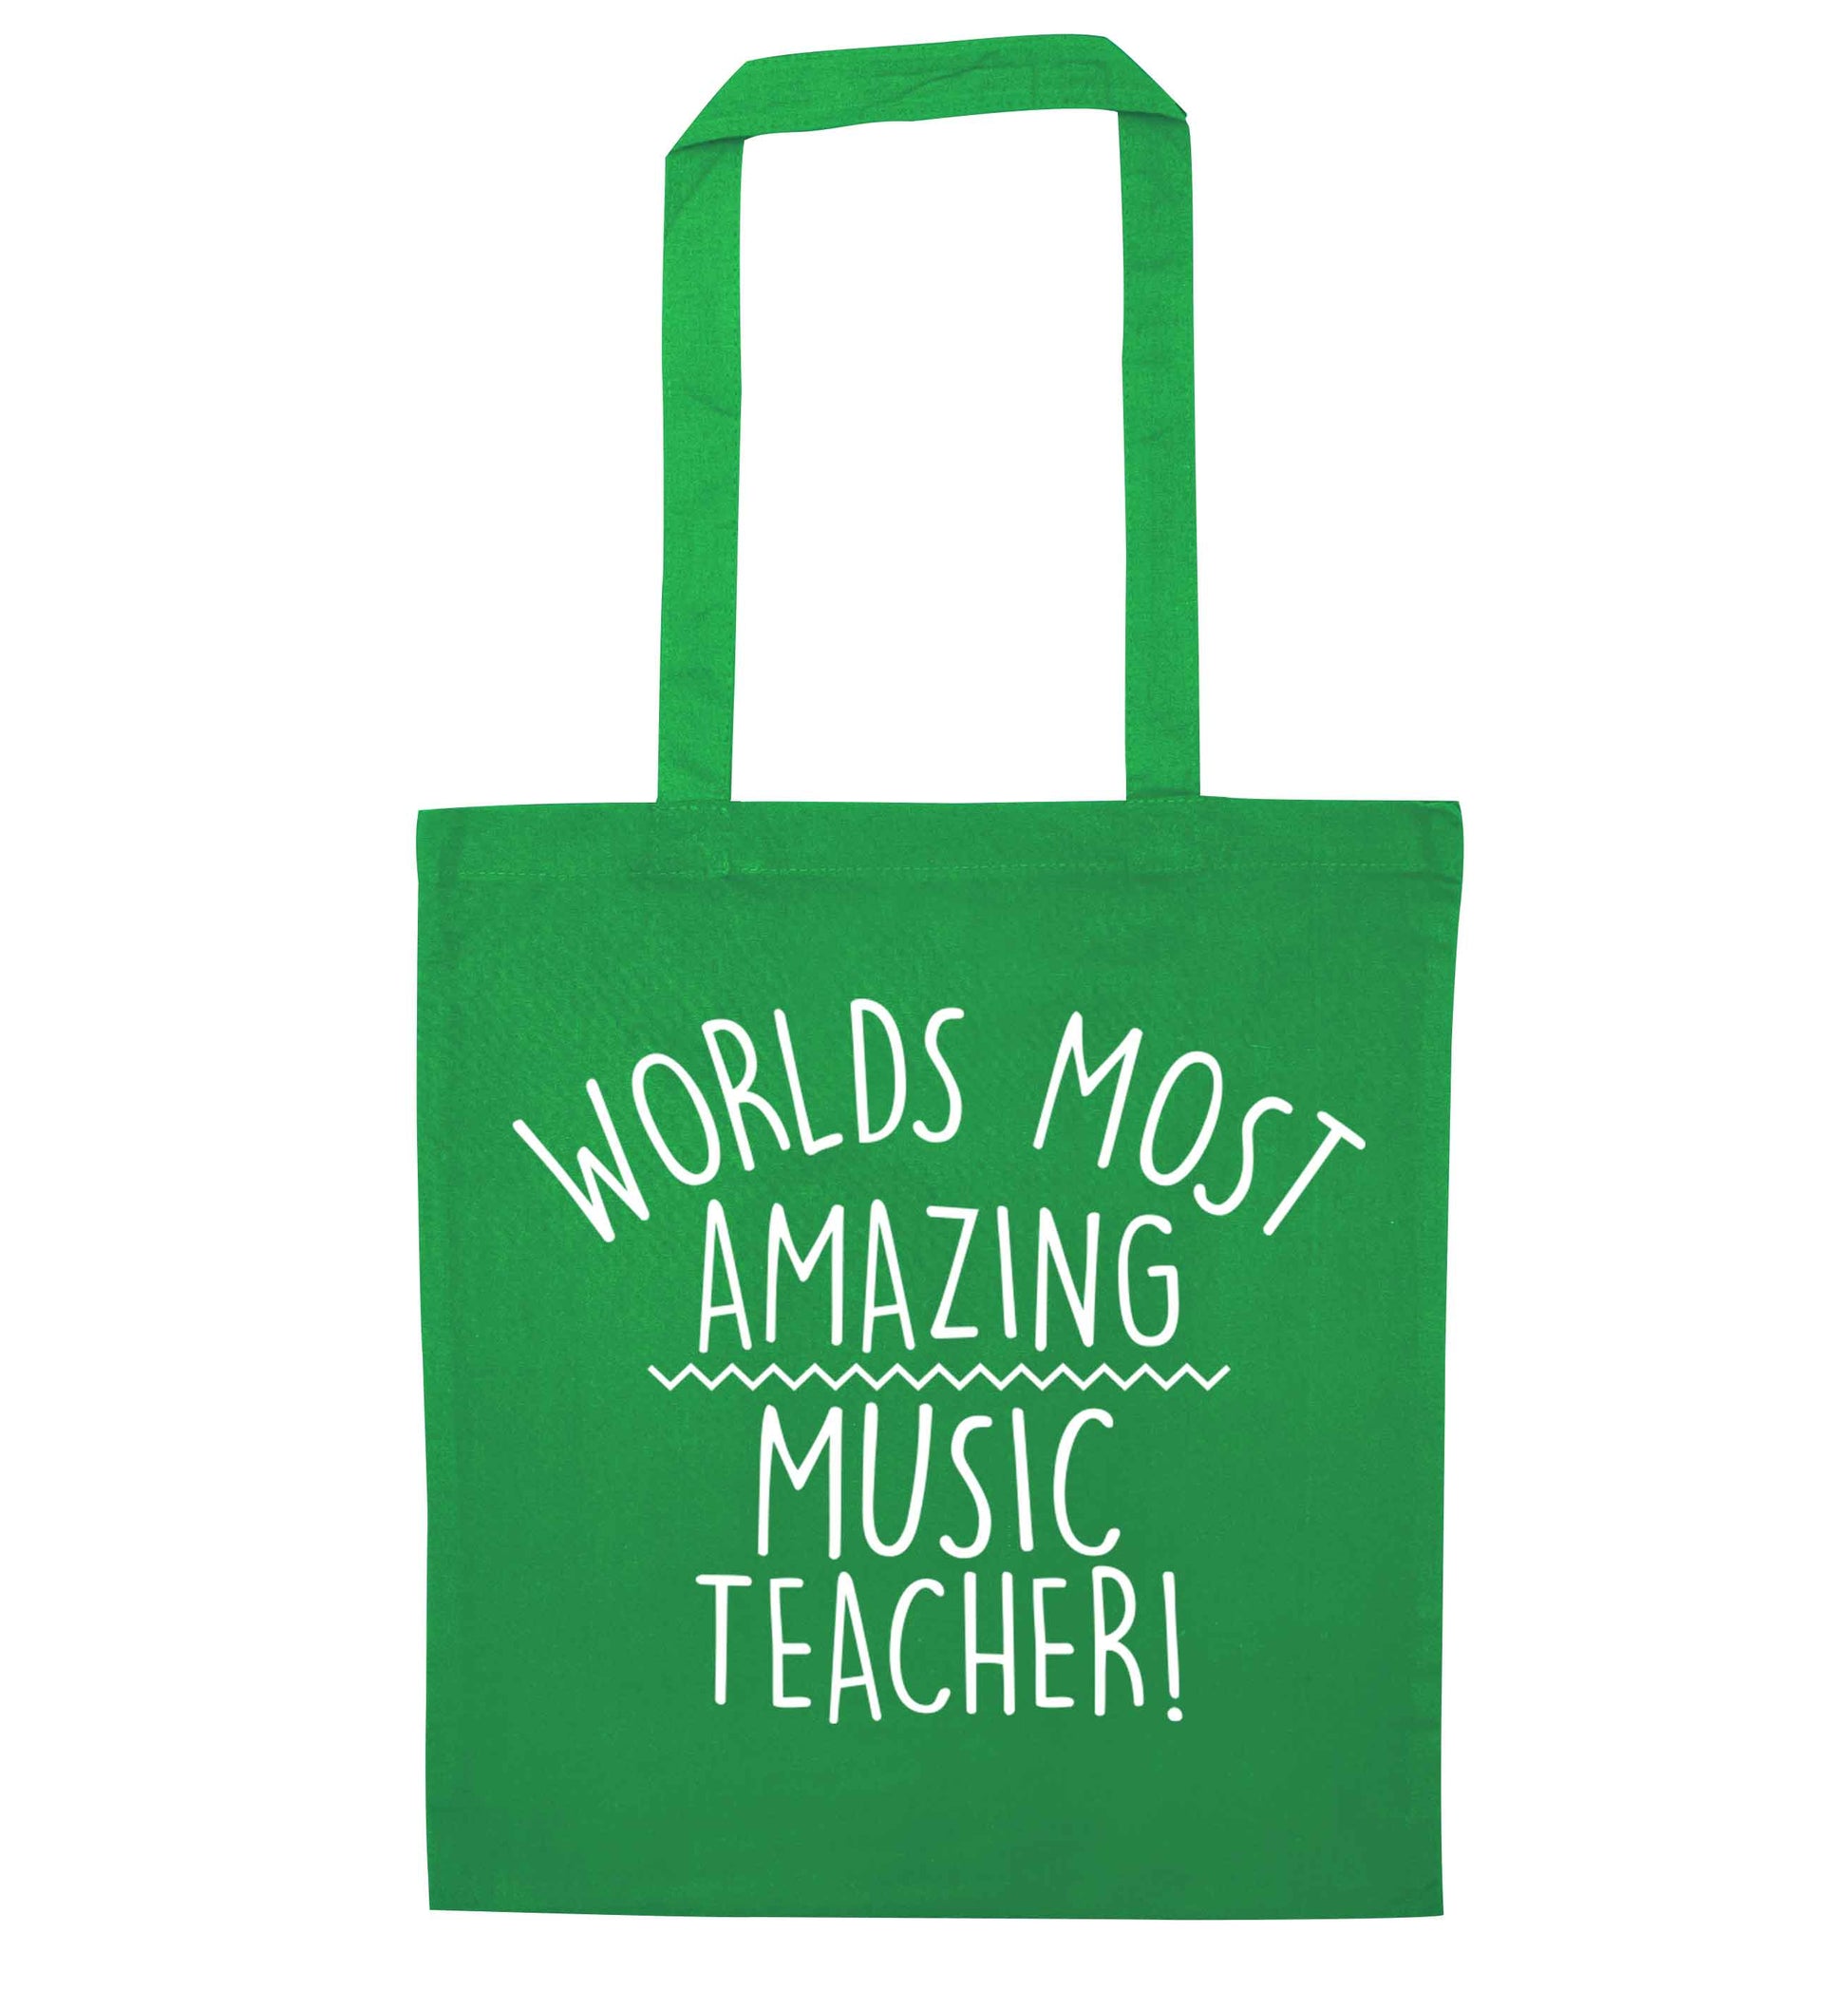 Worlds most amazing music teacher green tote bag